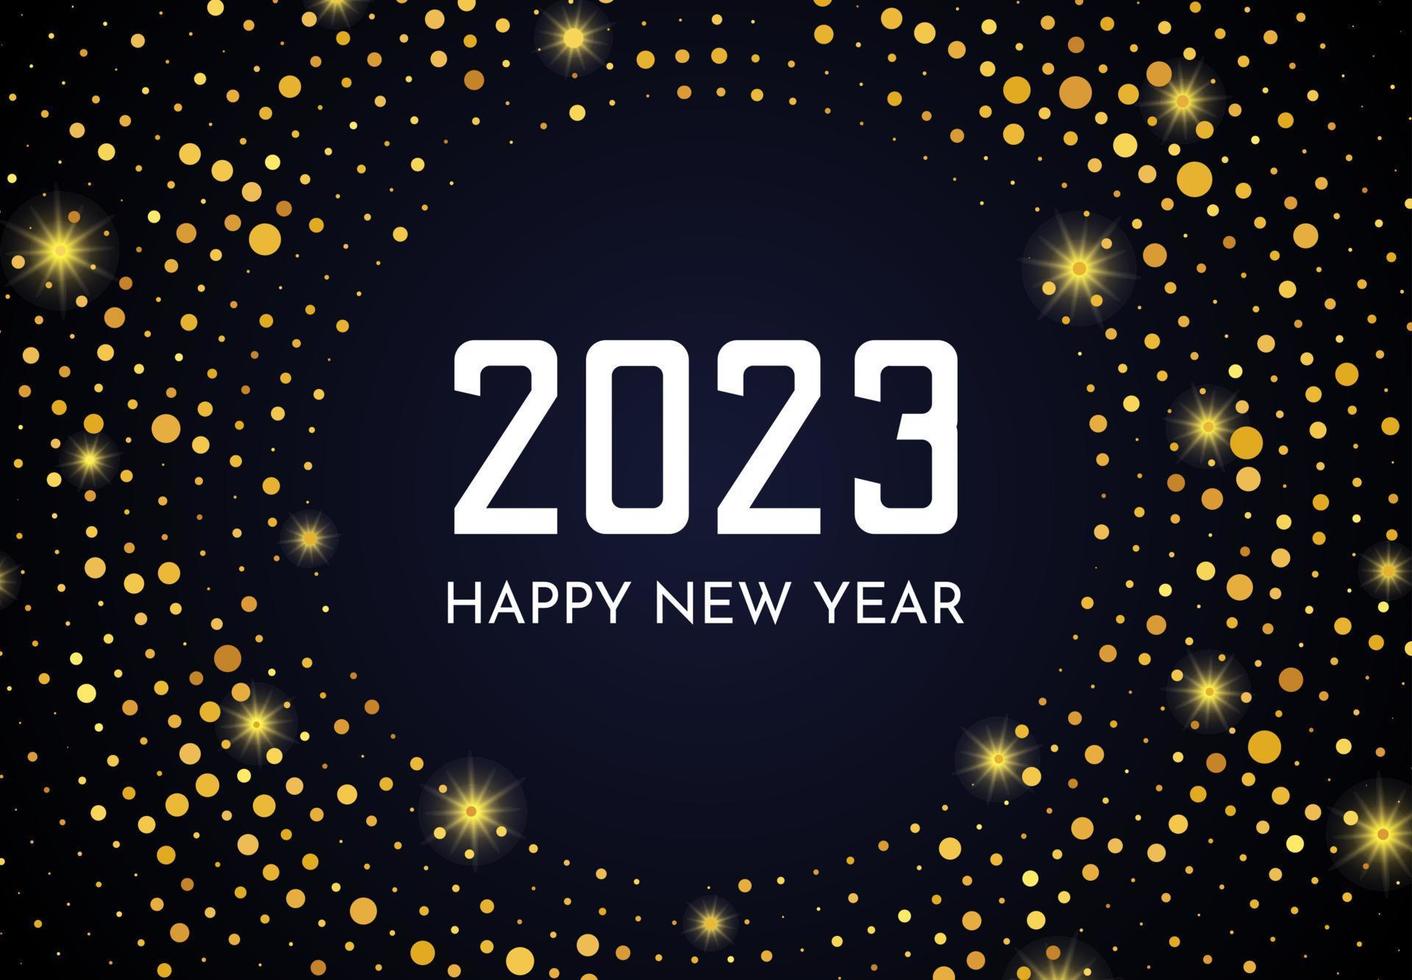 2023 Happy New Year of gold glitter pattern in circle form. Abstract gold glowing halftone dotted background for Christmas holiday greeting card on dark background. Vector illustration